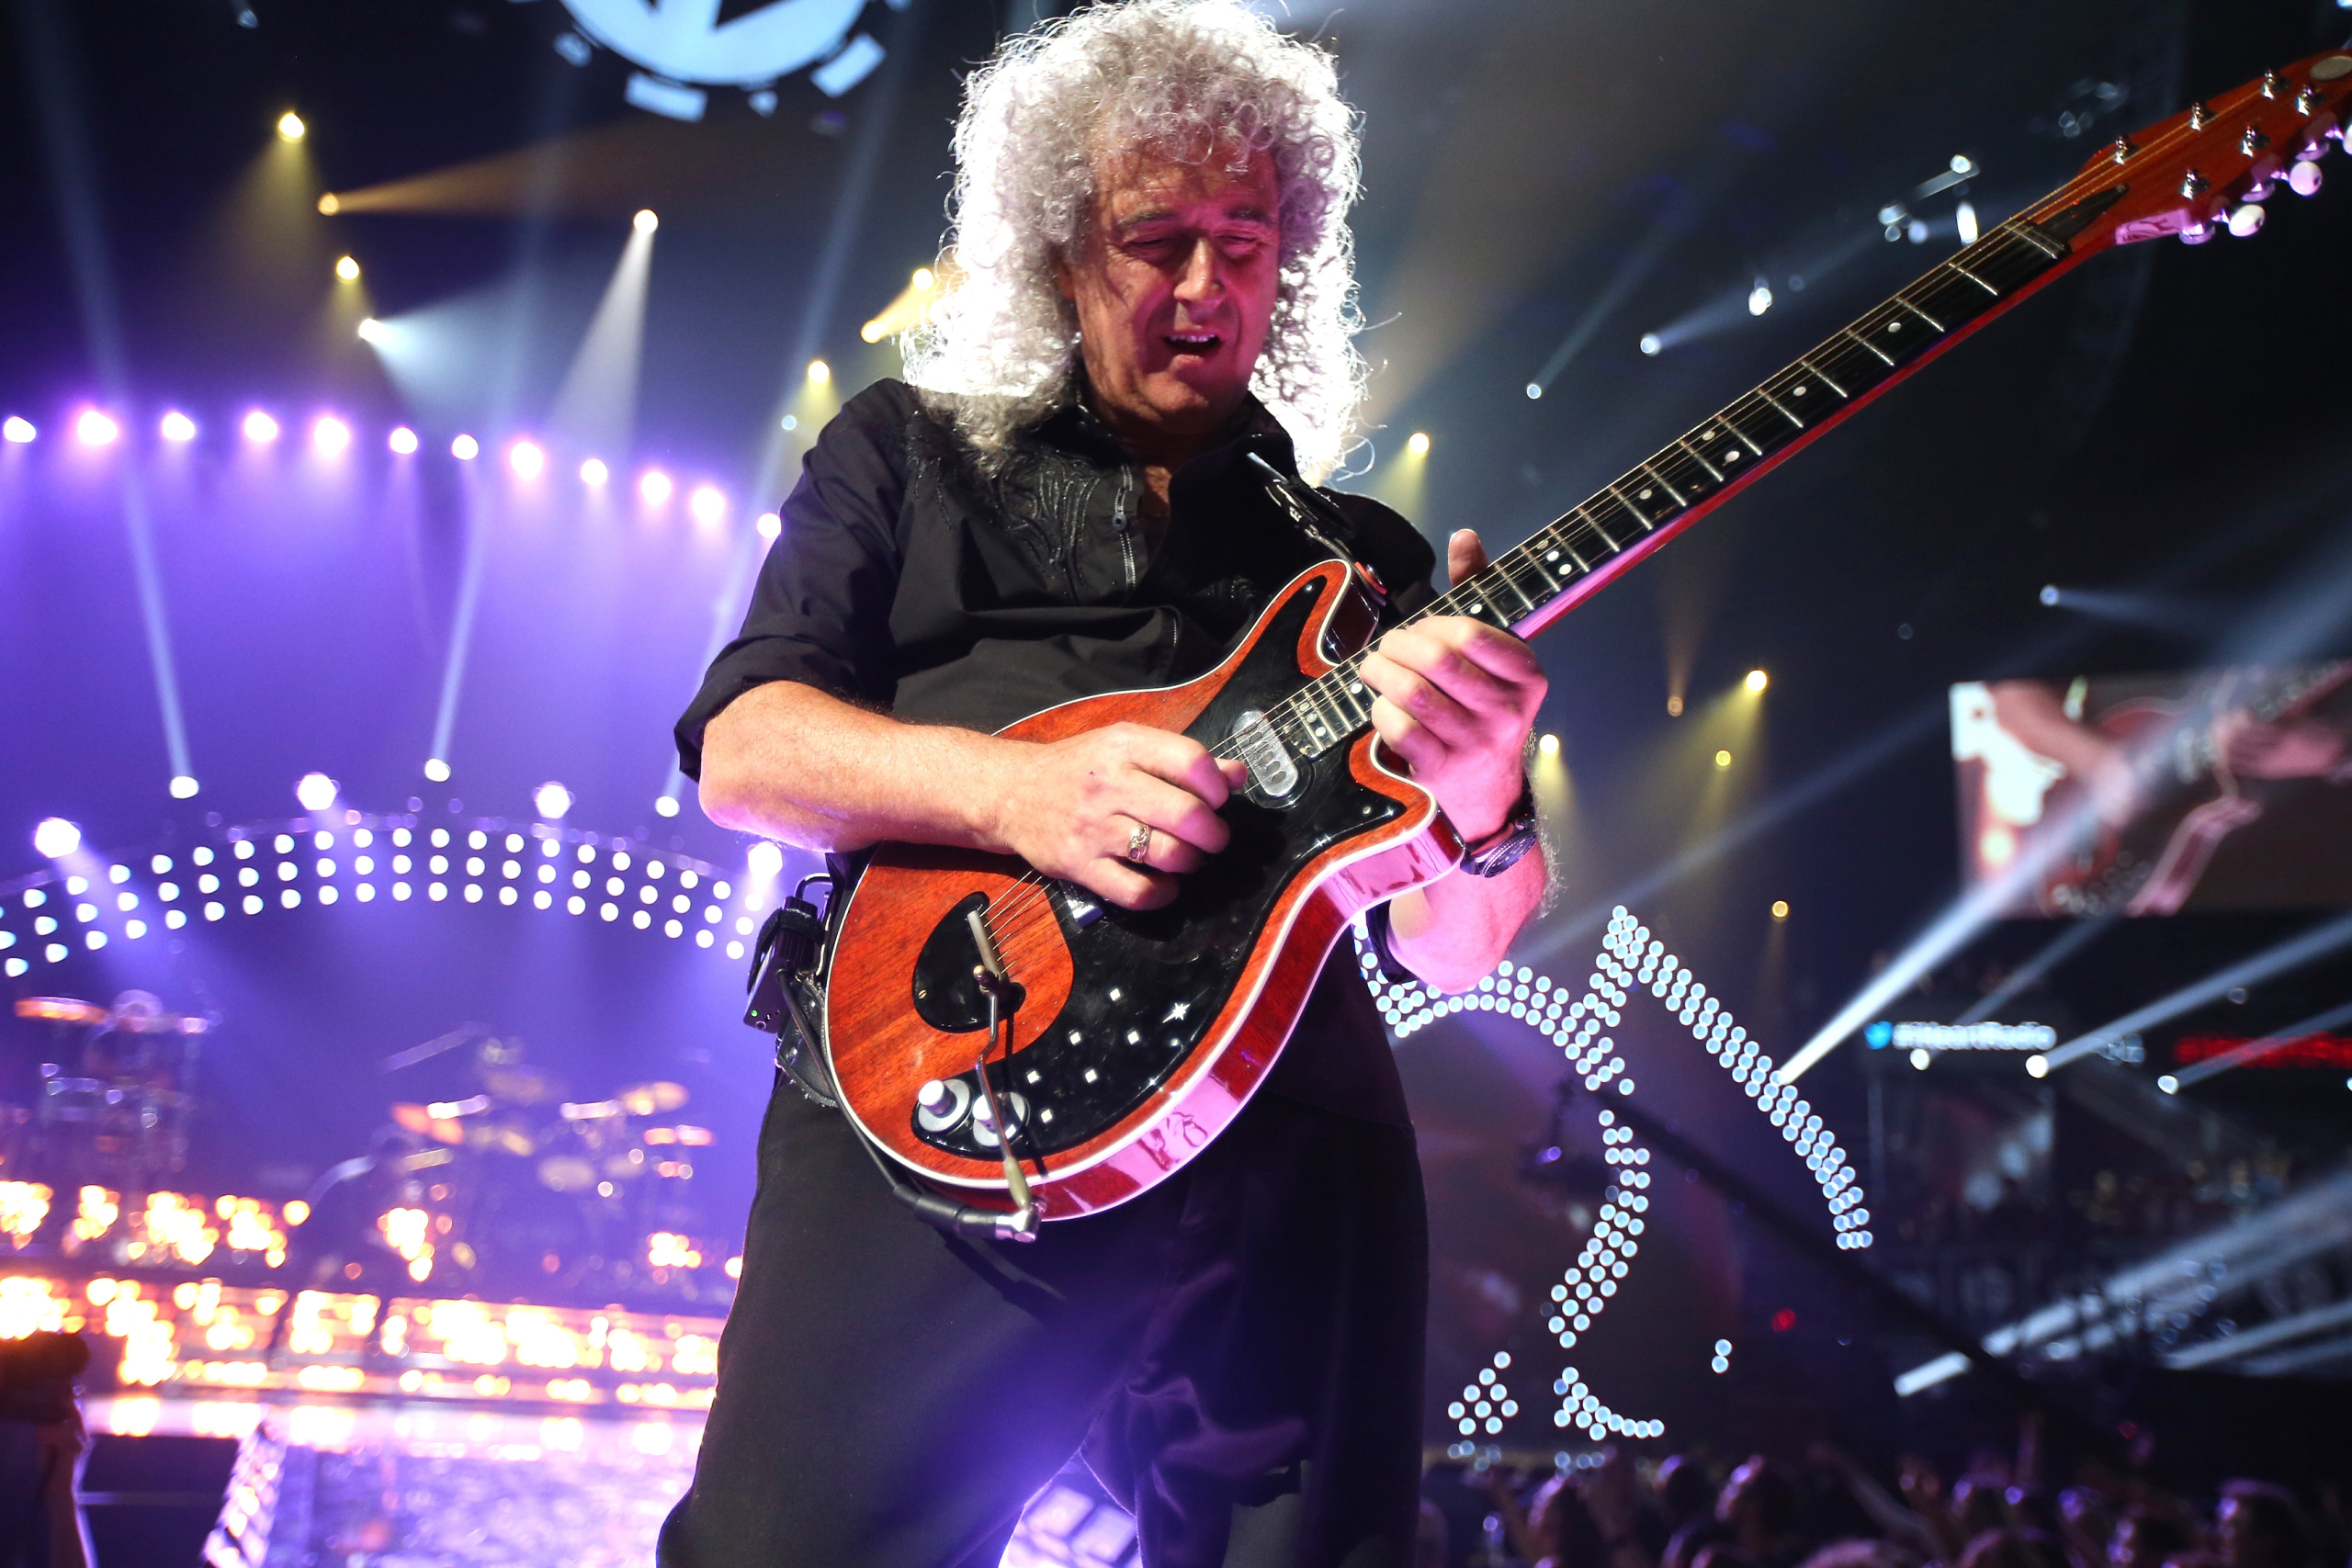 Queen’s Brian May tears up after performance with hologram Freddie Mercury.